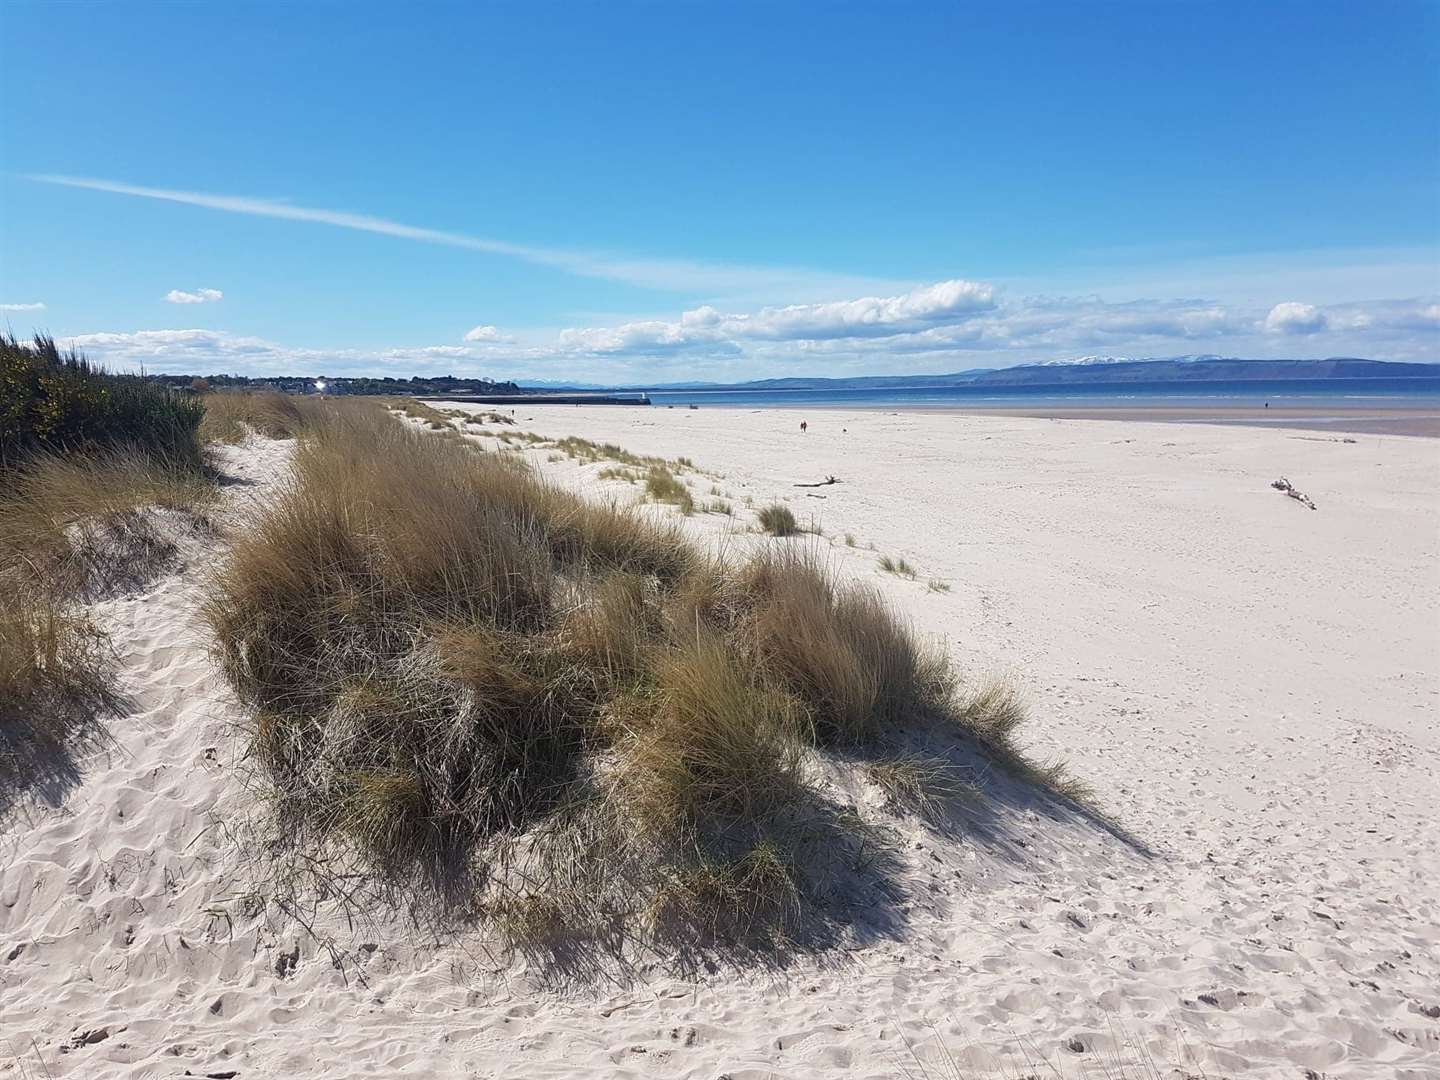 Sand dunes at the King’s Steps end of Nairn beach.